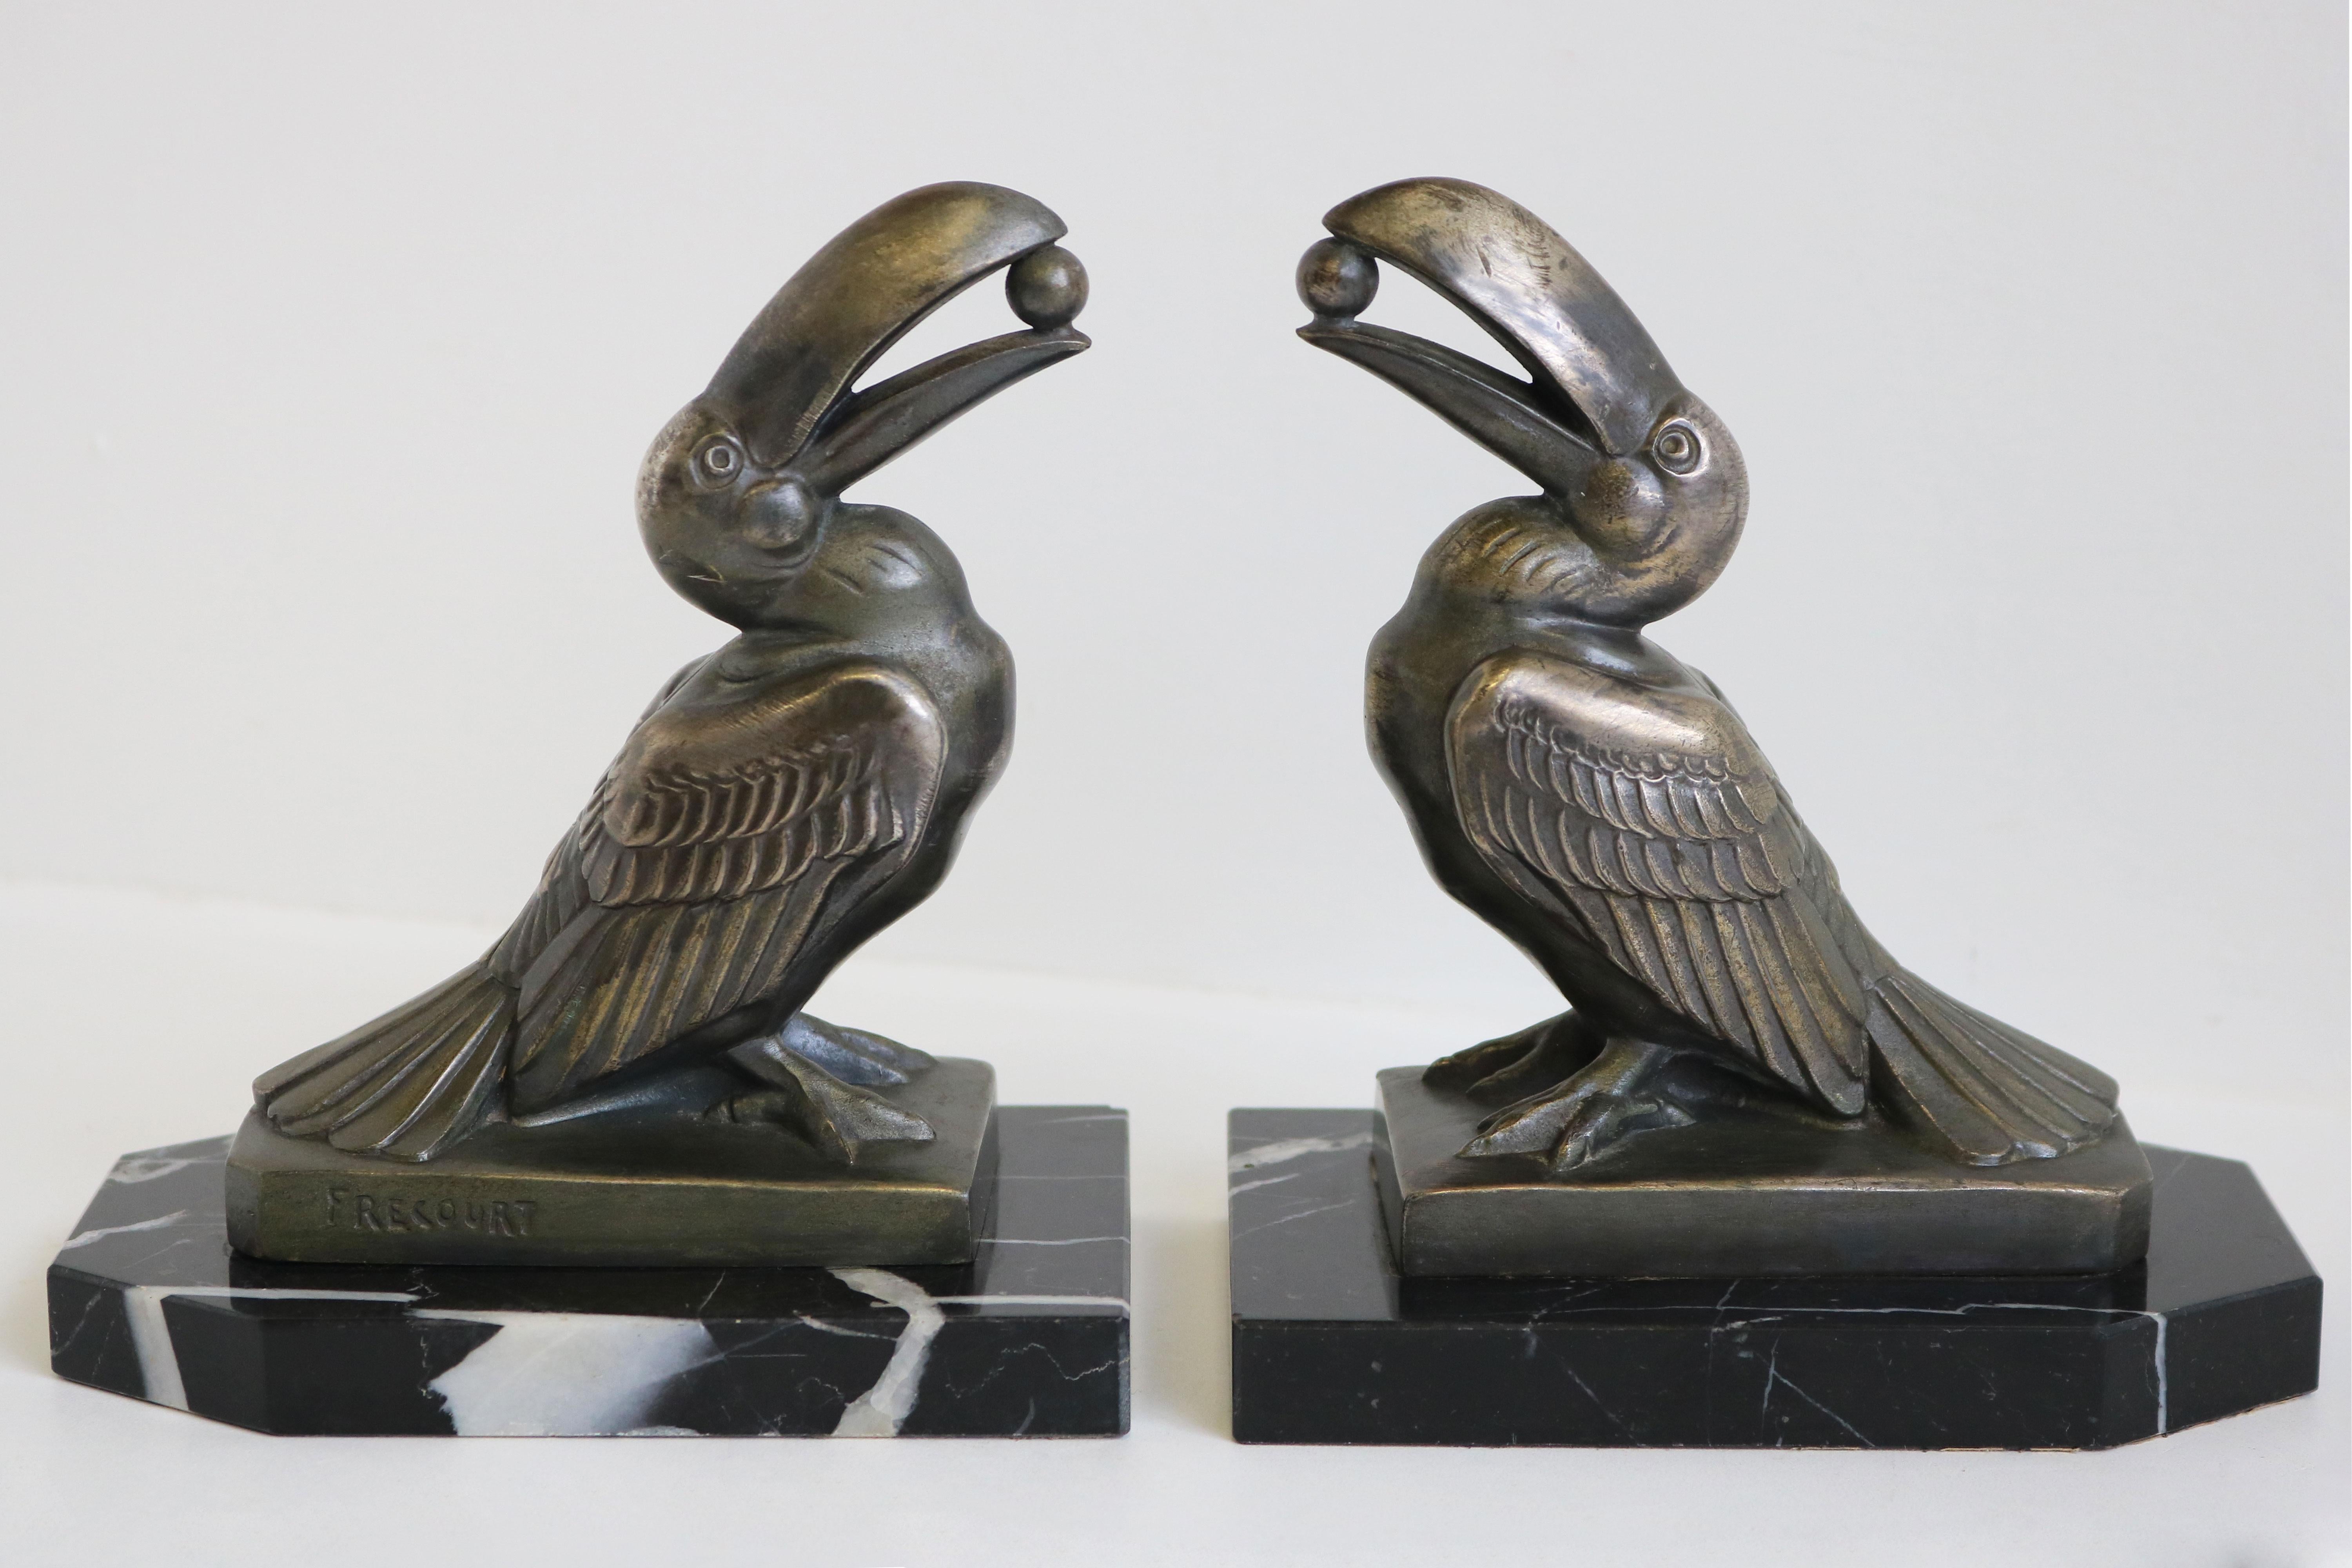 Marvelous pair of French Art Deco bookends by Maurice Frecourt 1925. Very desired Toucans holding Sphere model. 
Made out of Nero Marquina black marble & spelter with amazing patina. 
Maurice Frecourt is famous for his Art Deco style animal